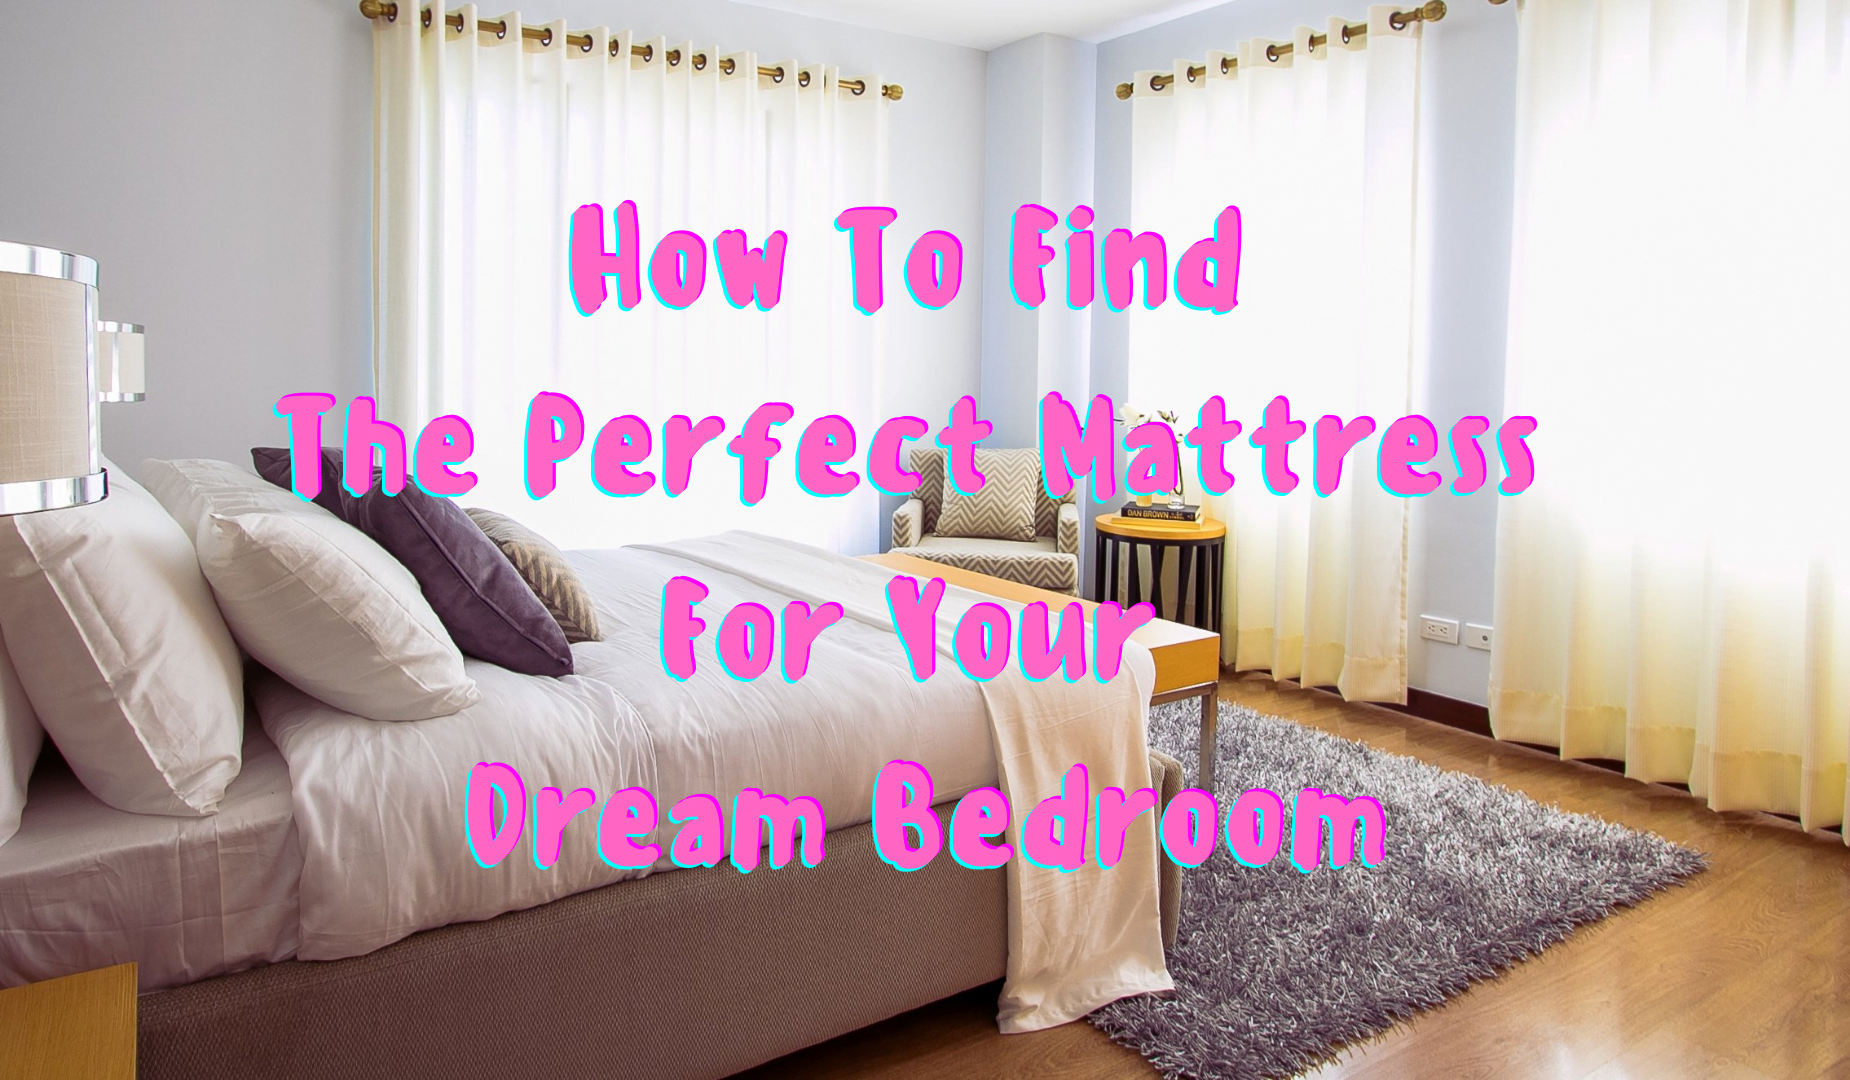 How To Find The Perfect Mattress For Your Dream Bedroom